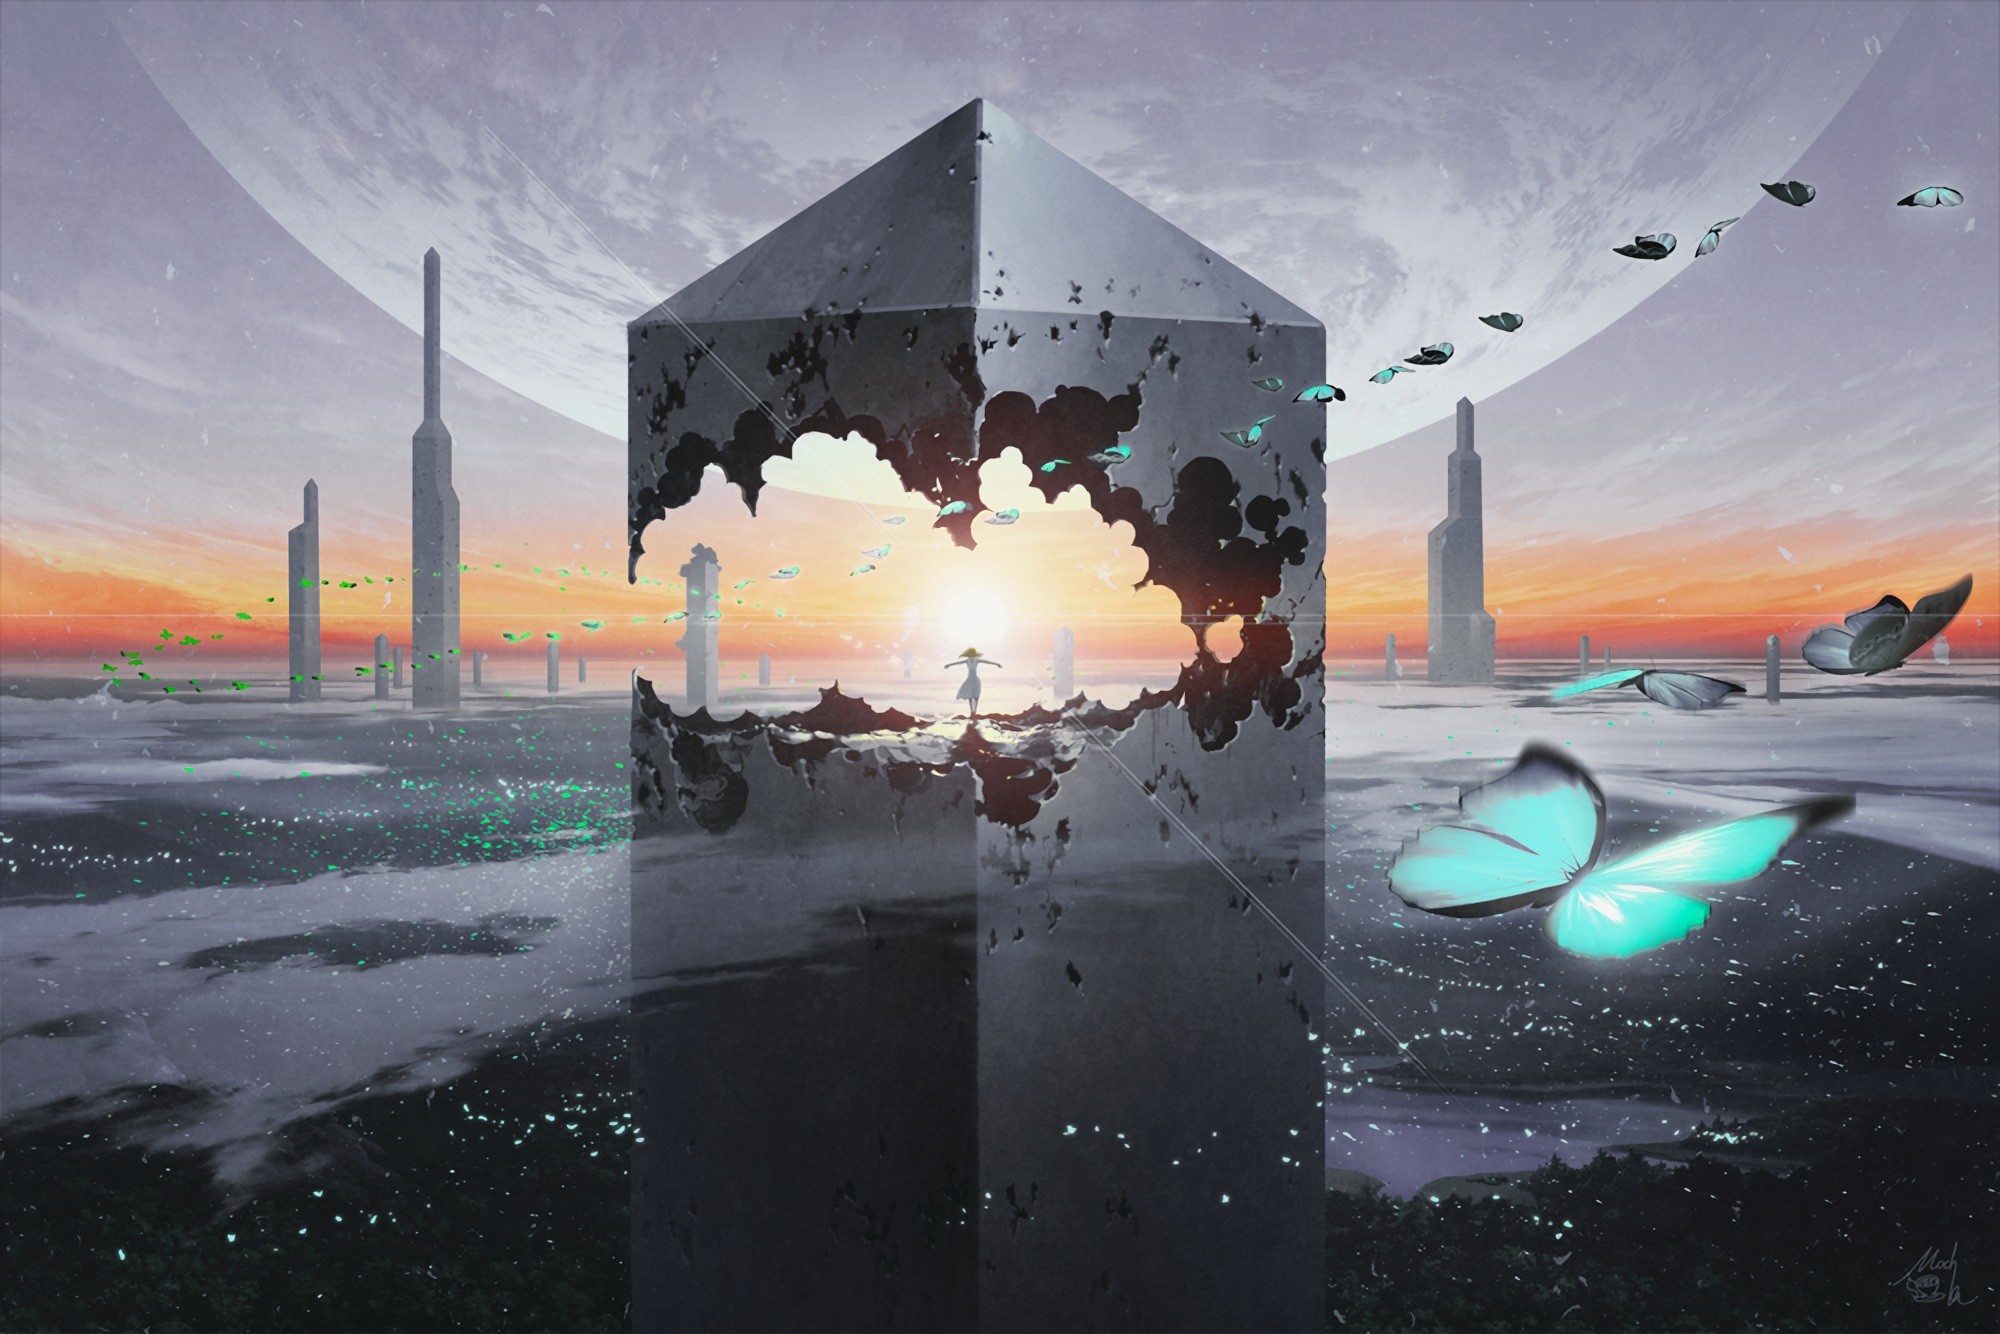 Anime 2000x1334 Technoheart waifu2x cityscape skyline Moon butterfly clouds sunset skyscraper anime sky animals insect planet sunlight anime girls watermarked